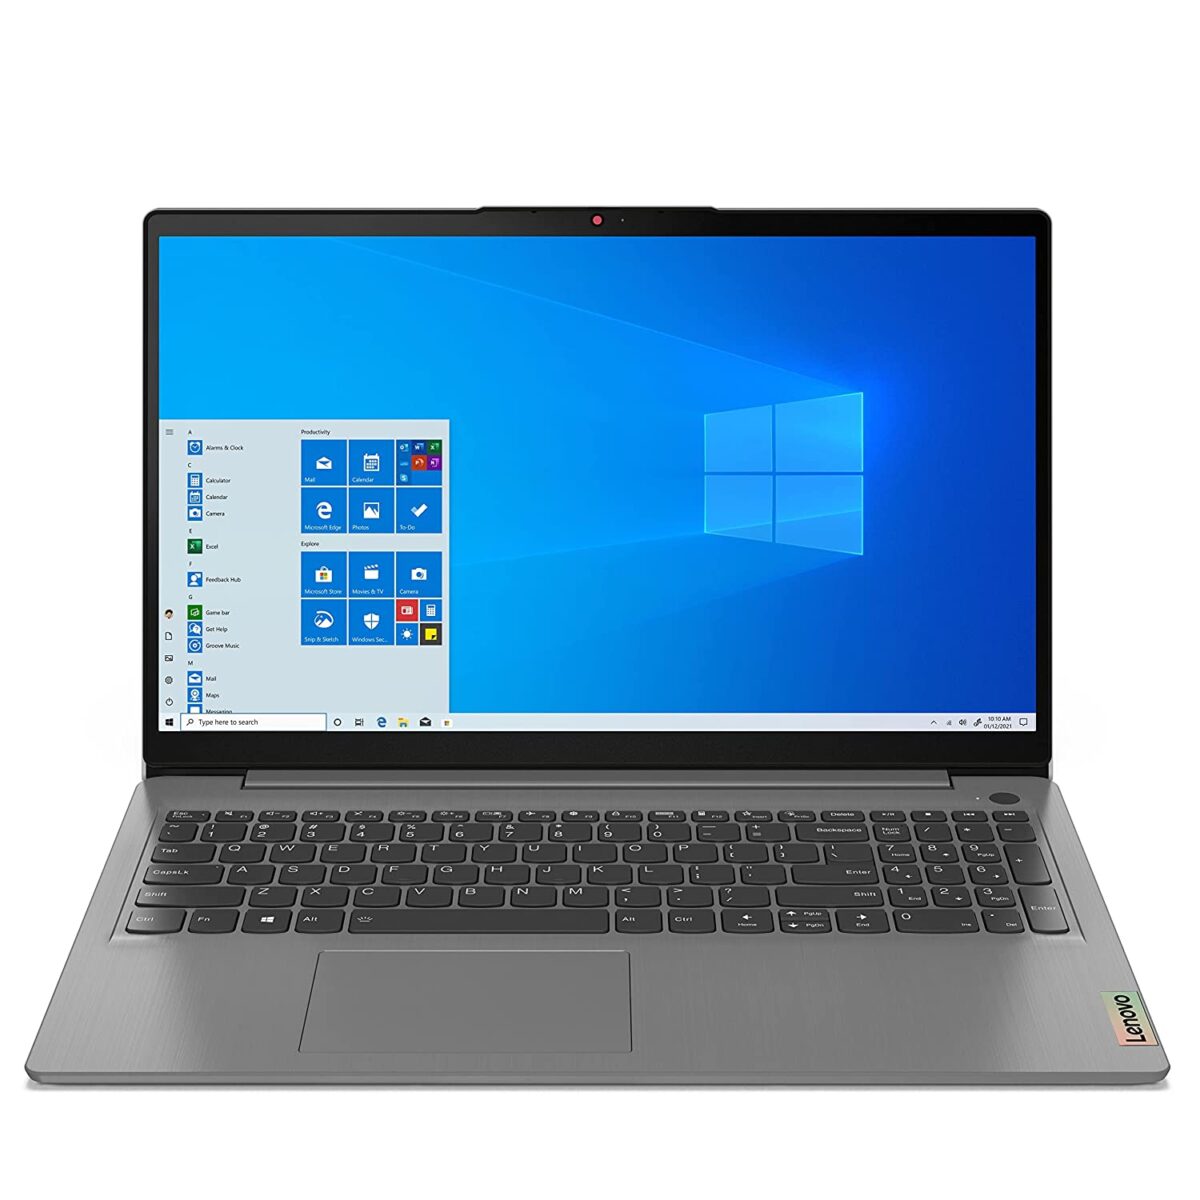 Lenovo IdeaPad Slim 3 82KU0238IN Laptop Price, Specs and Features